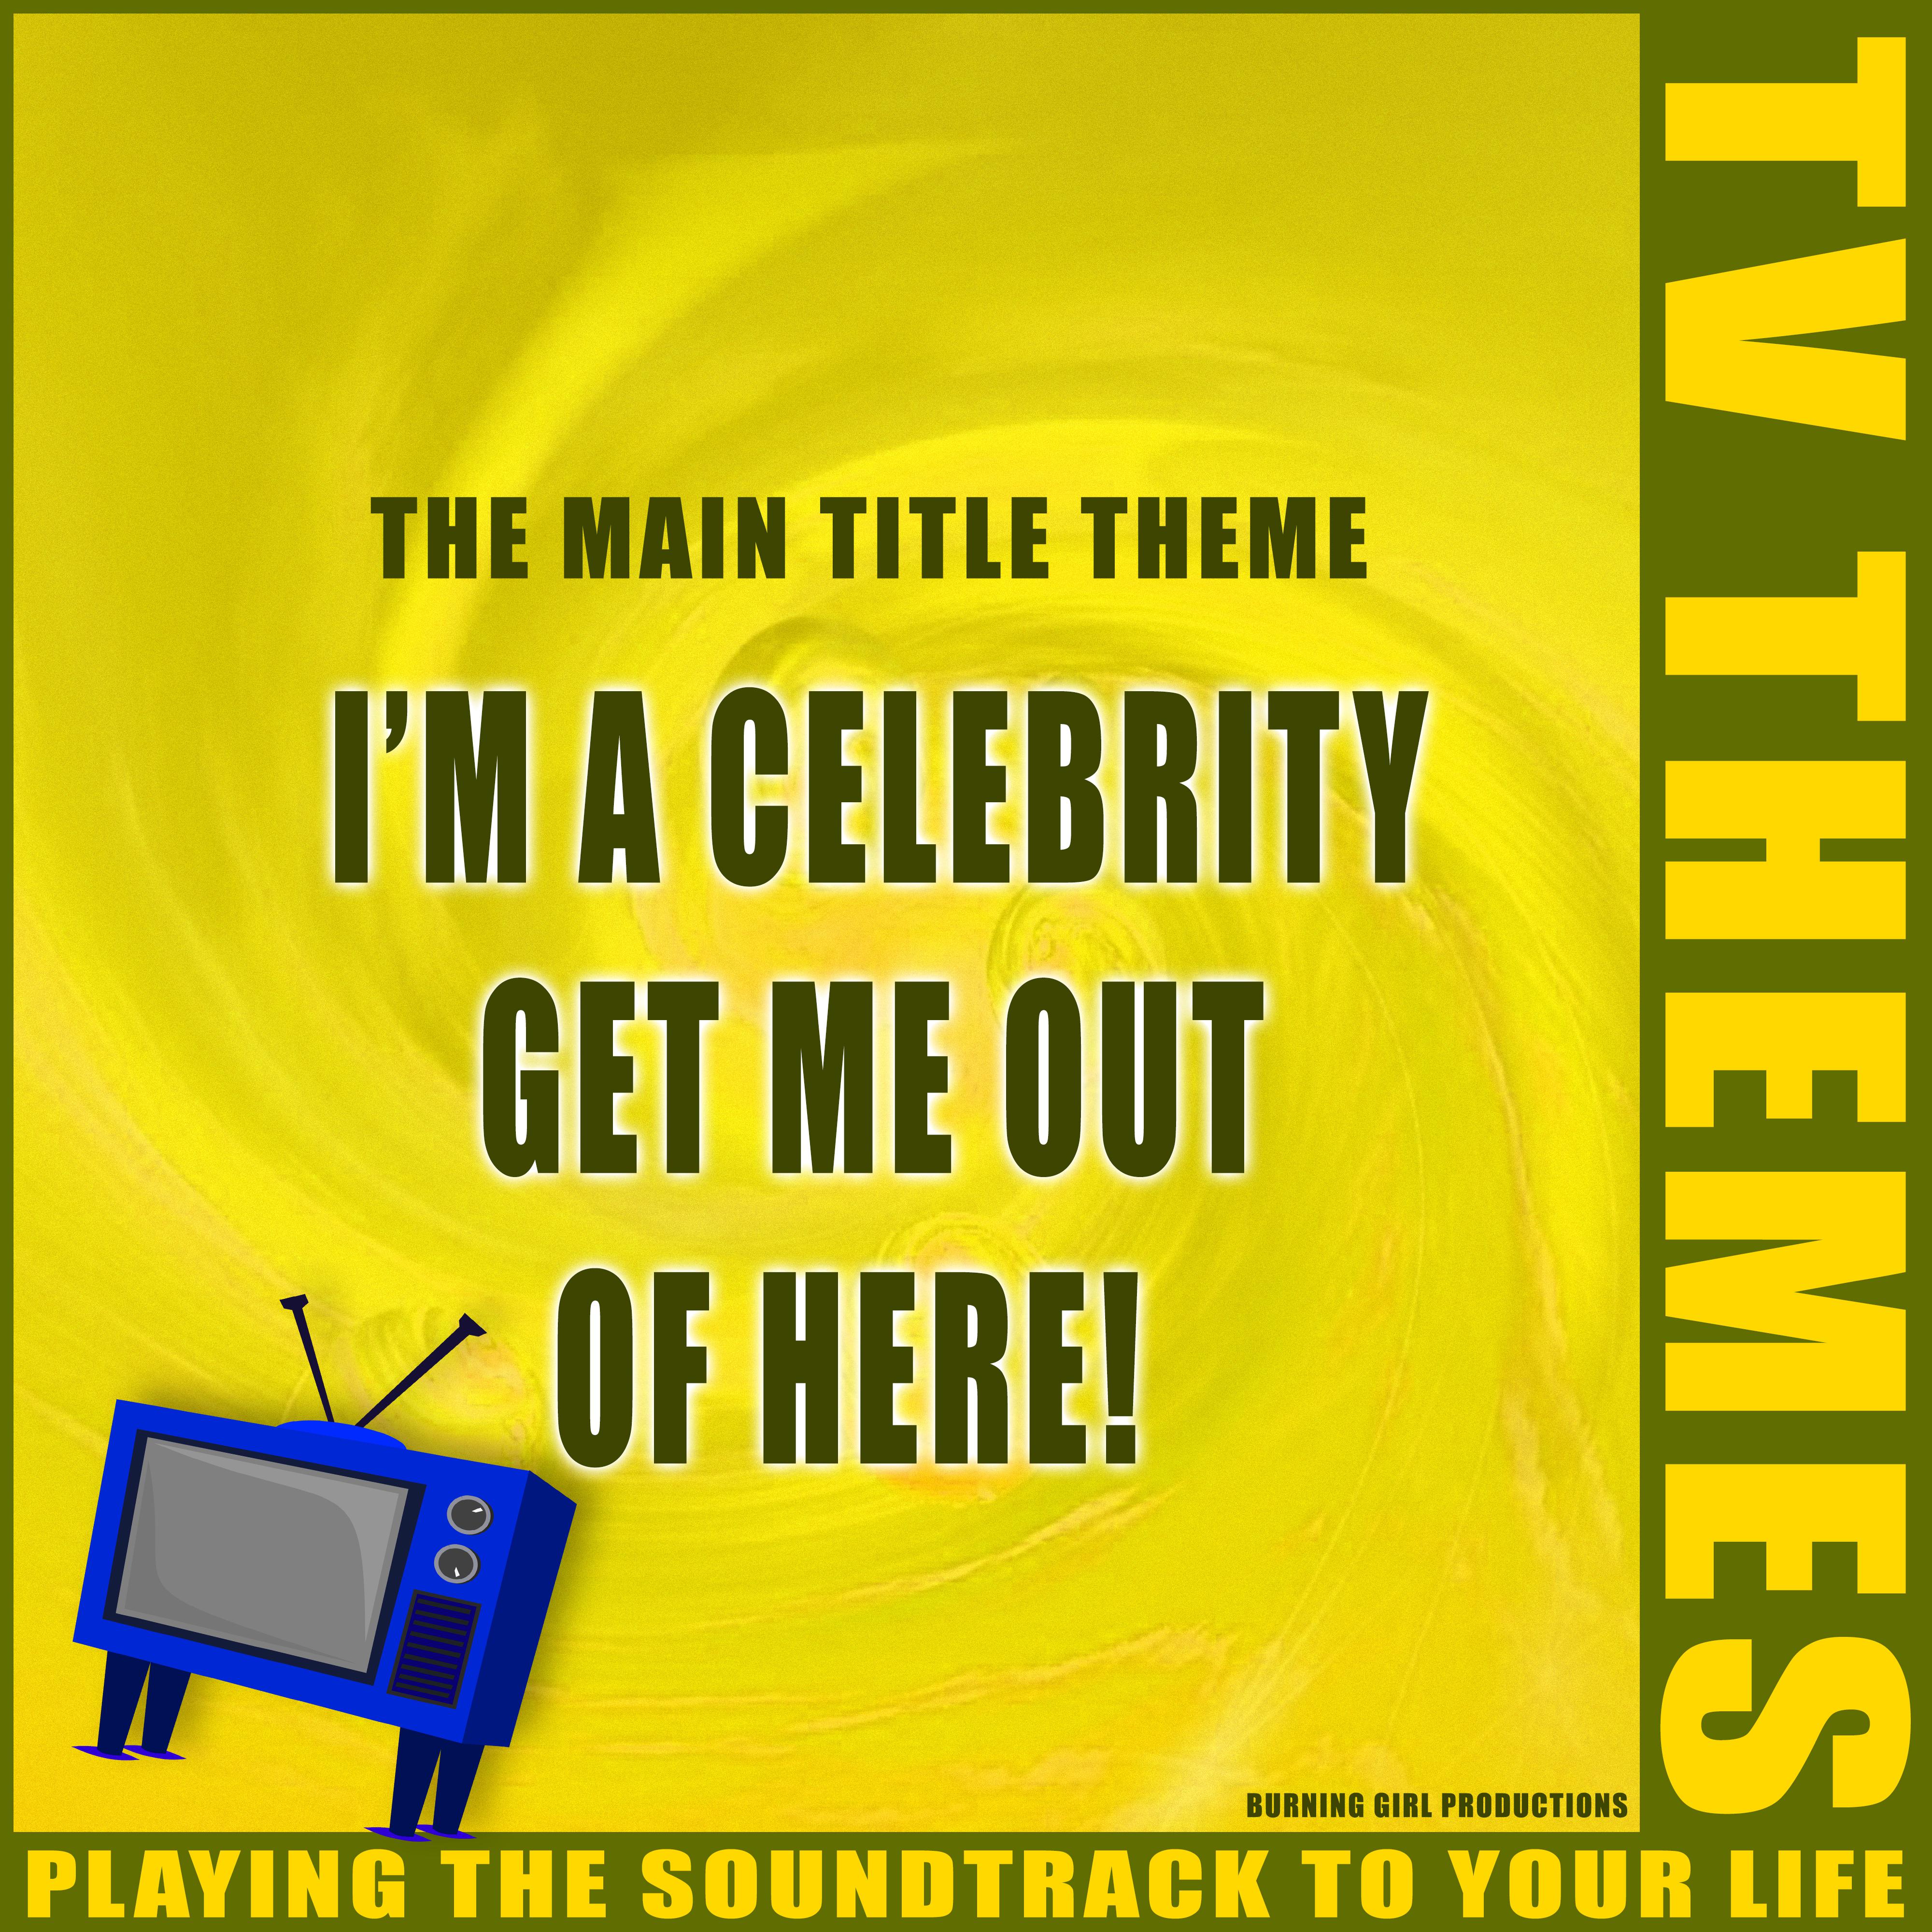 The Main Title Theme - I'm A Celebrity Get Me Out Of Here!